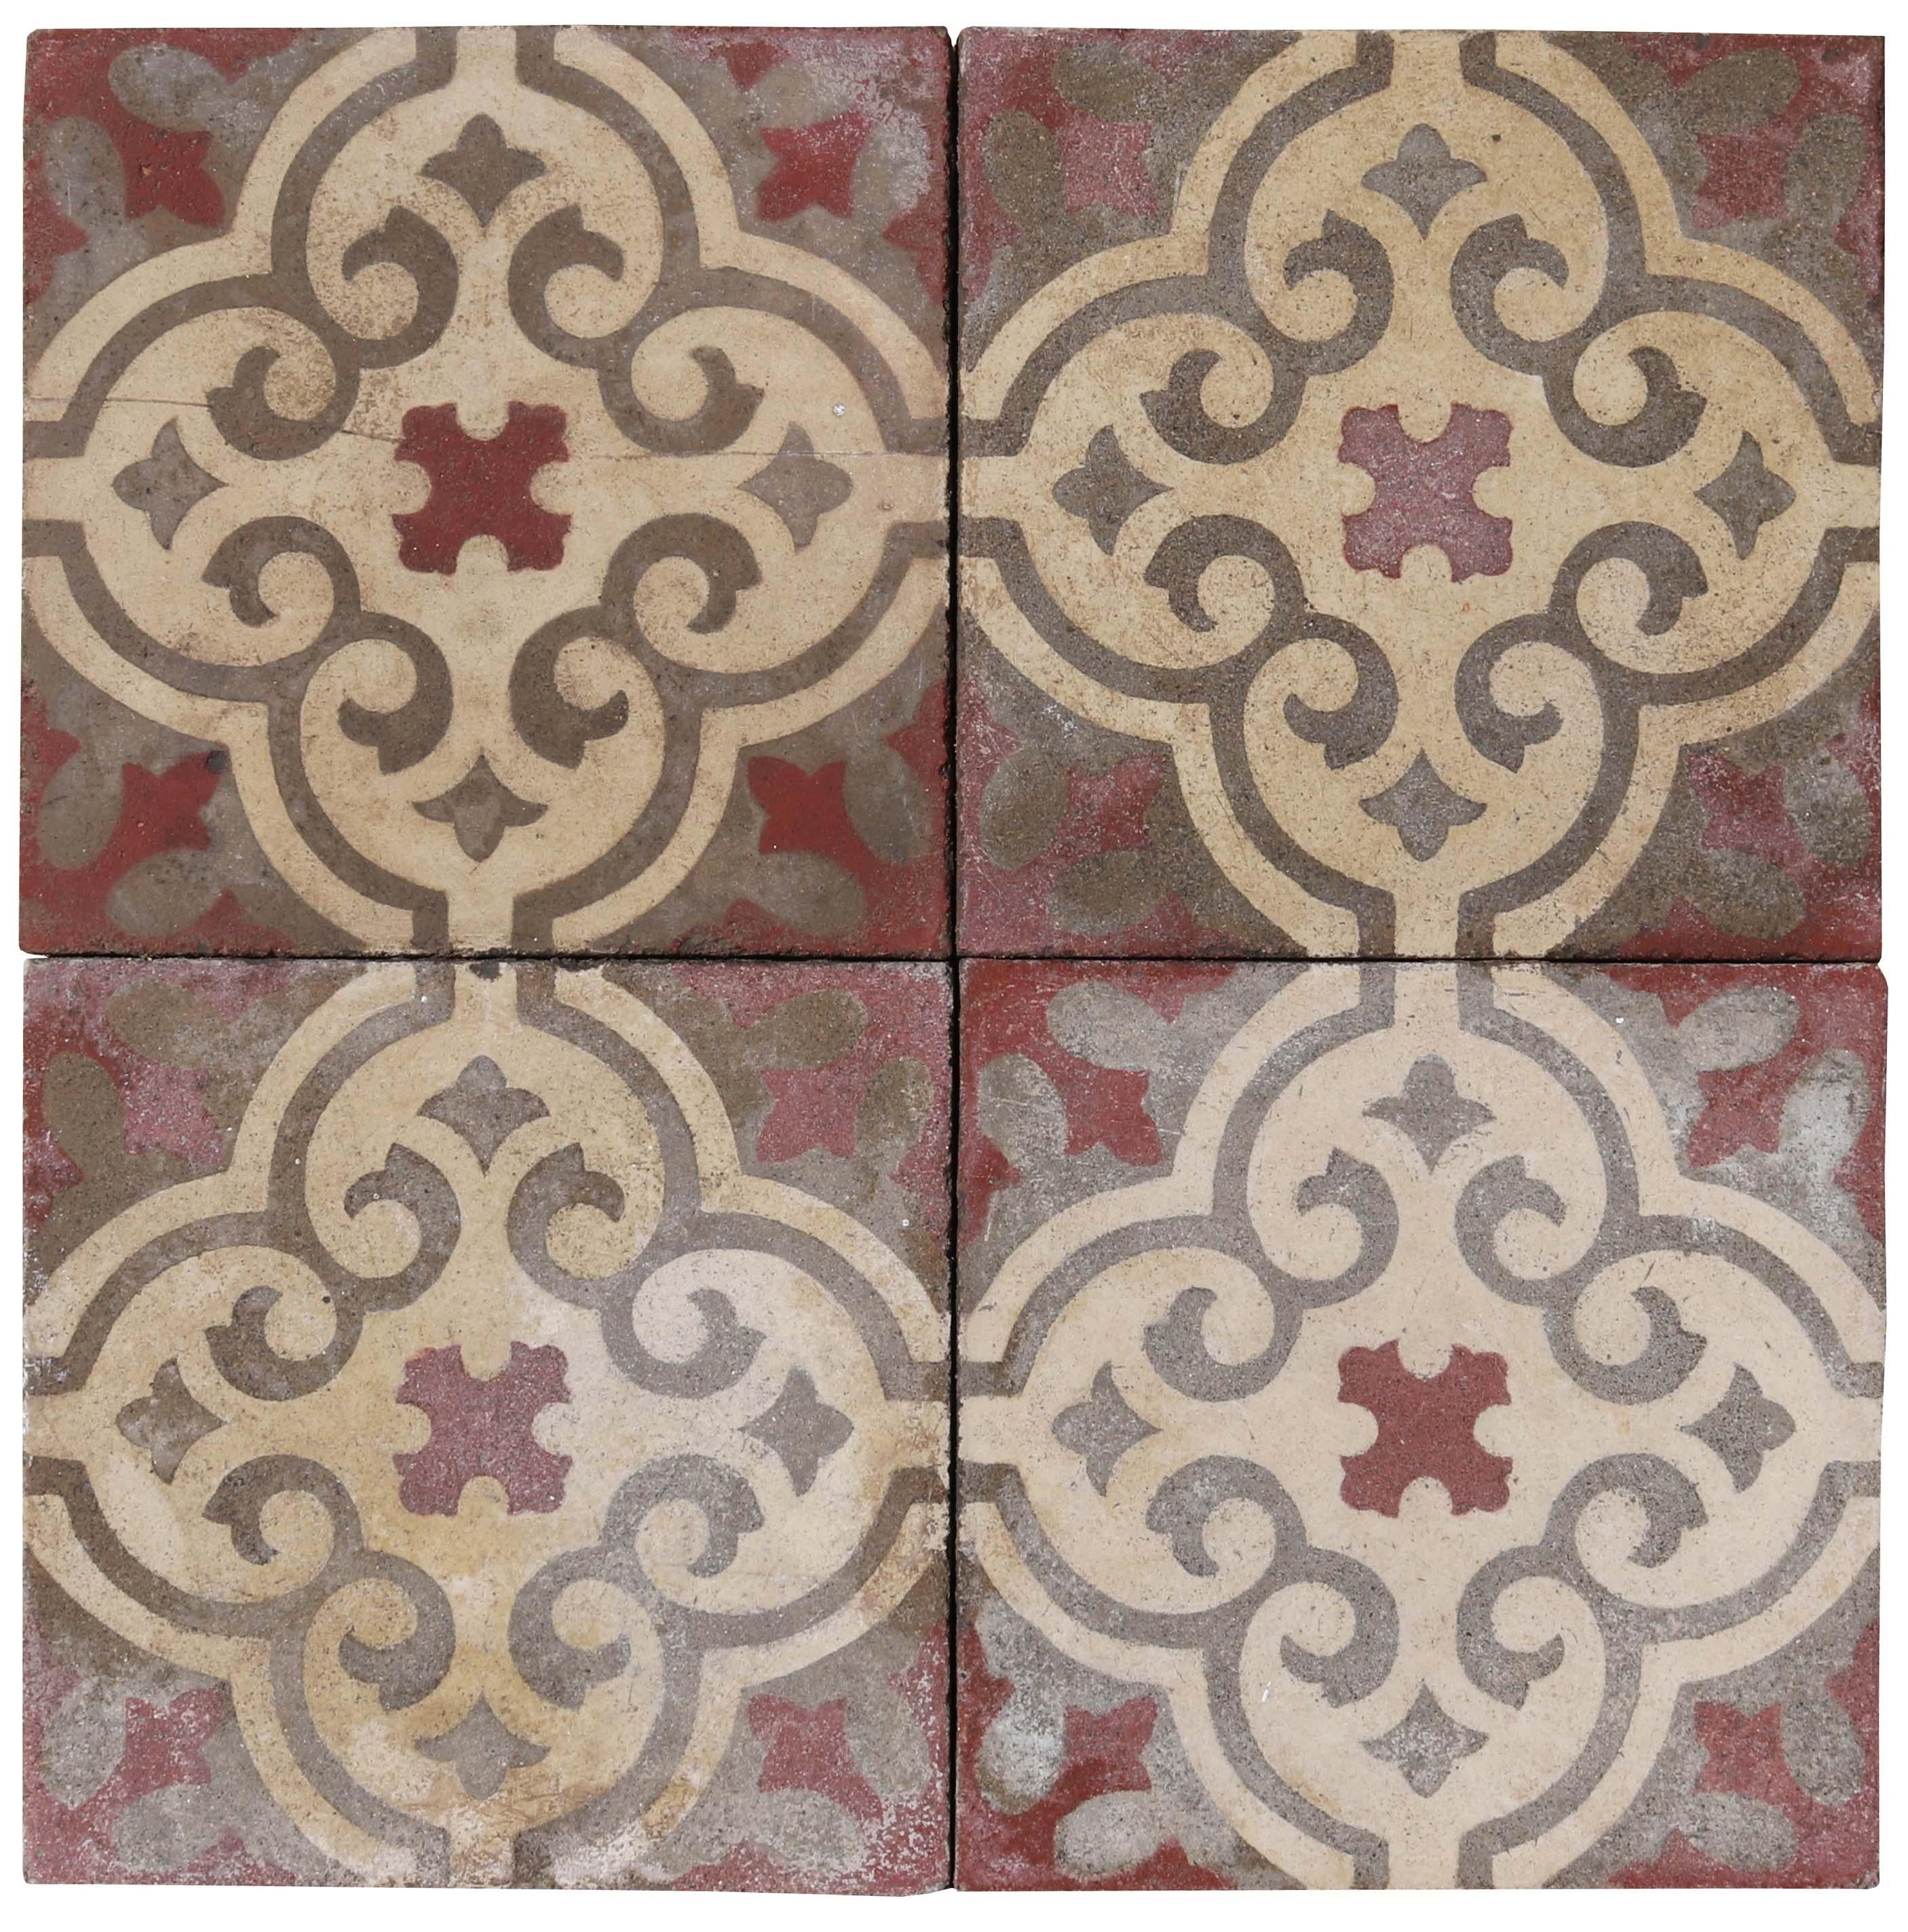 A set of 120 reclaimed encaustic cement tiles. These tiles will cover 4.8 m2 or 51 sq ft.